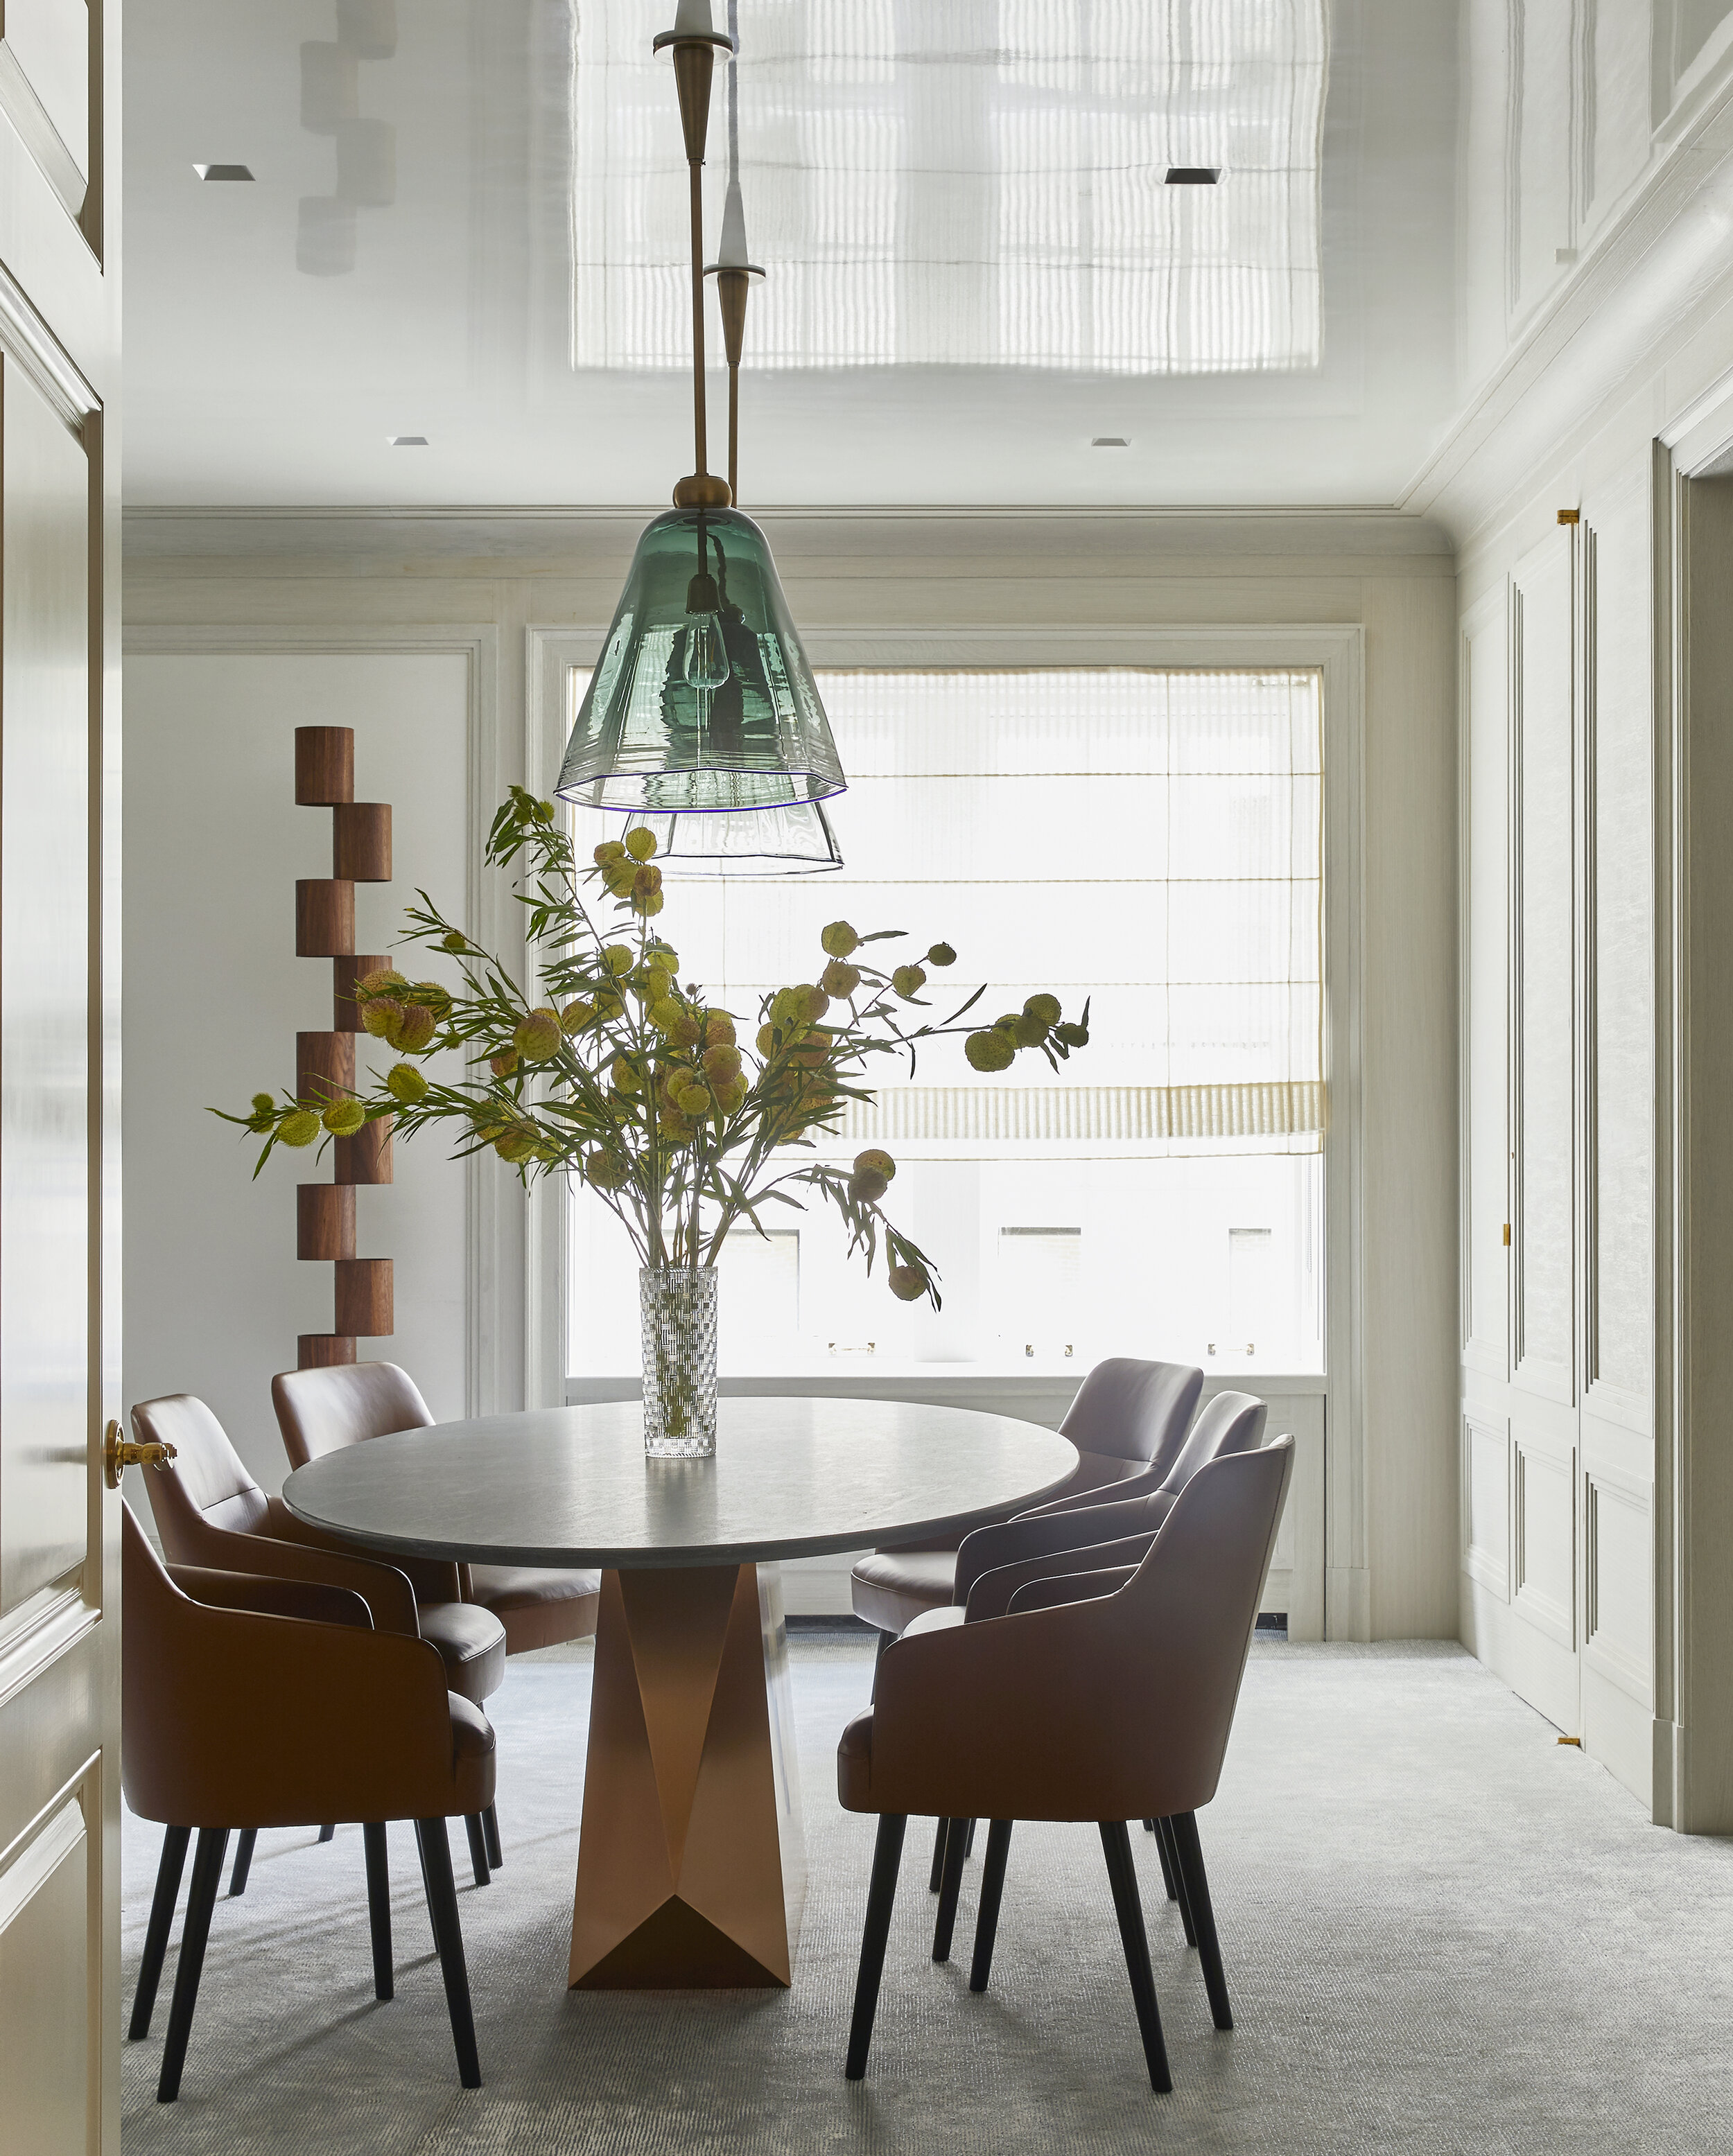 Custom hand-tufted carpet by Crosby Street Studios Murano Blown Glass Faceted Lanterns from L’Art de Vivre Henry Dining Table from Egg Collective Mono dining chairs from Avenue Road